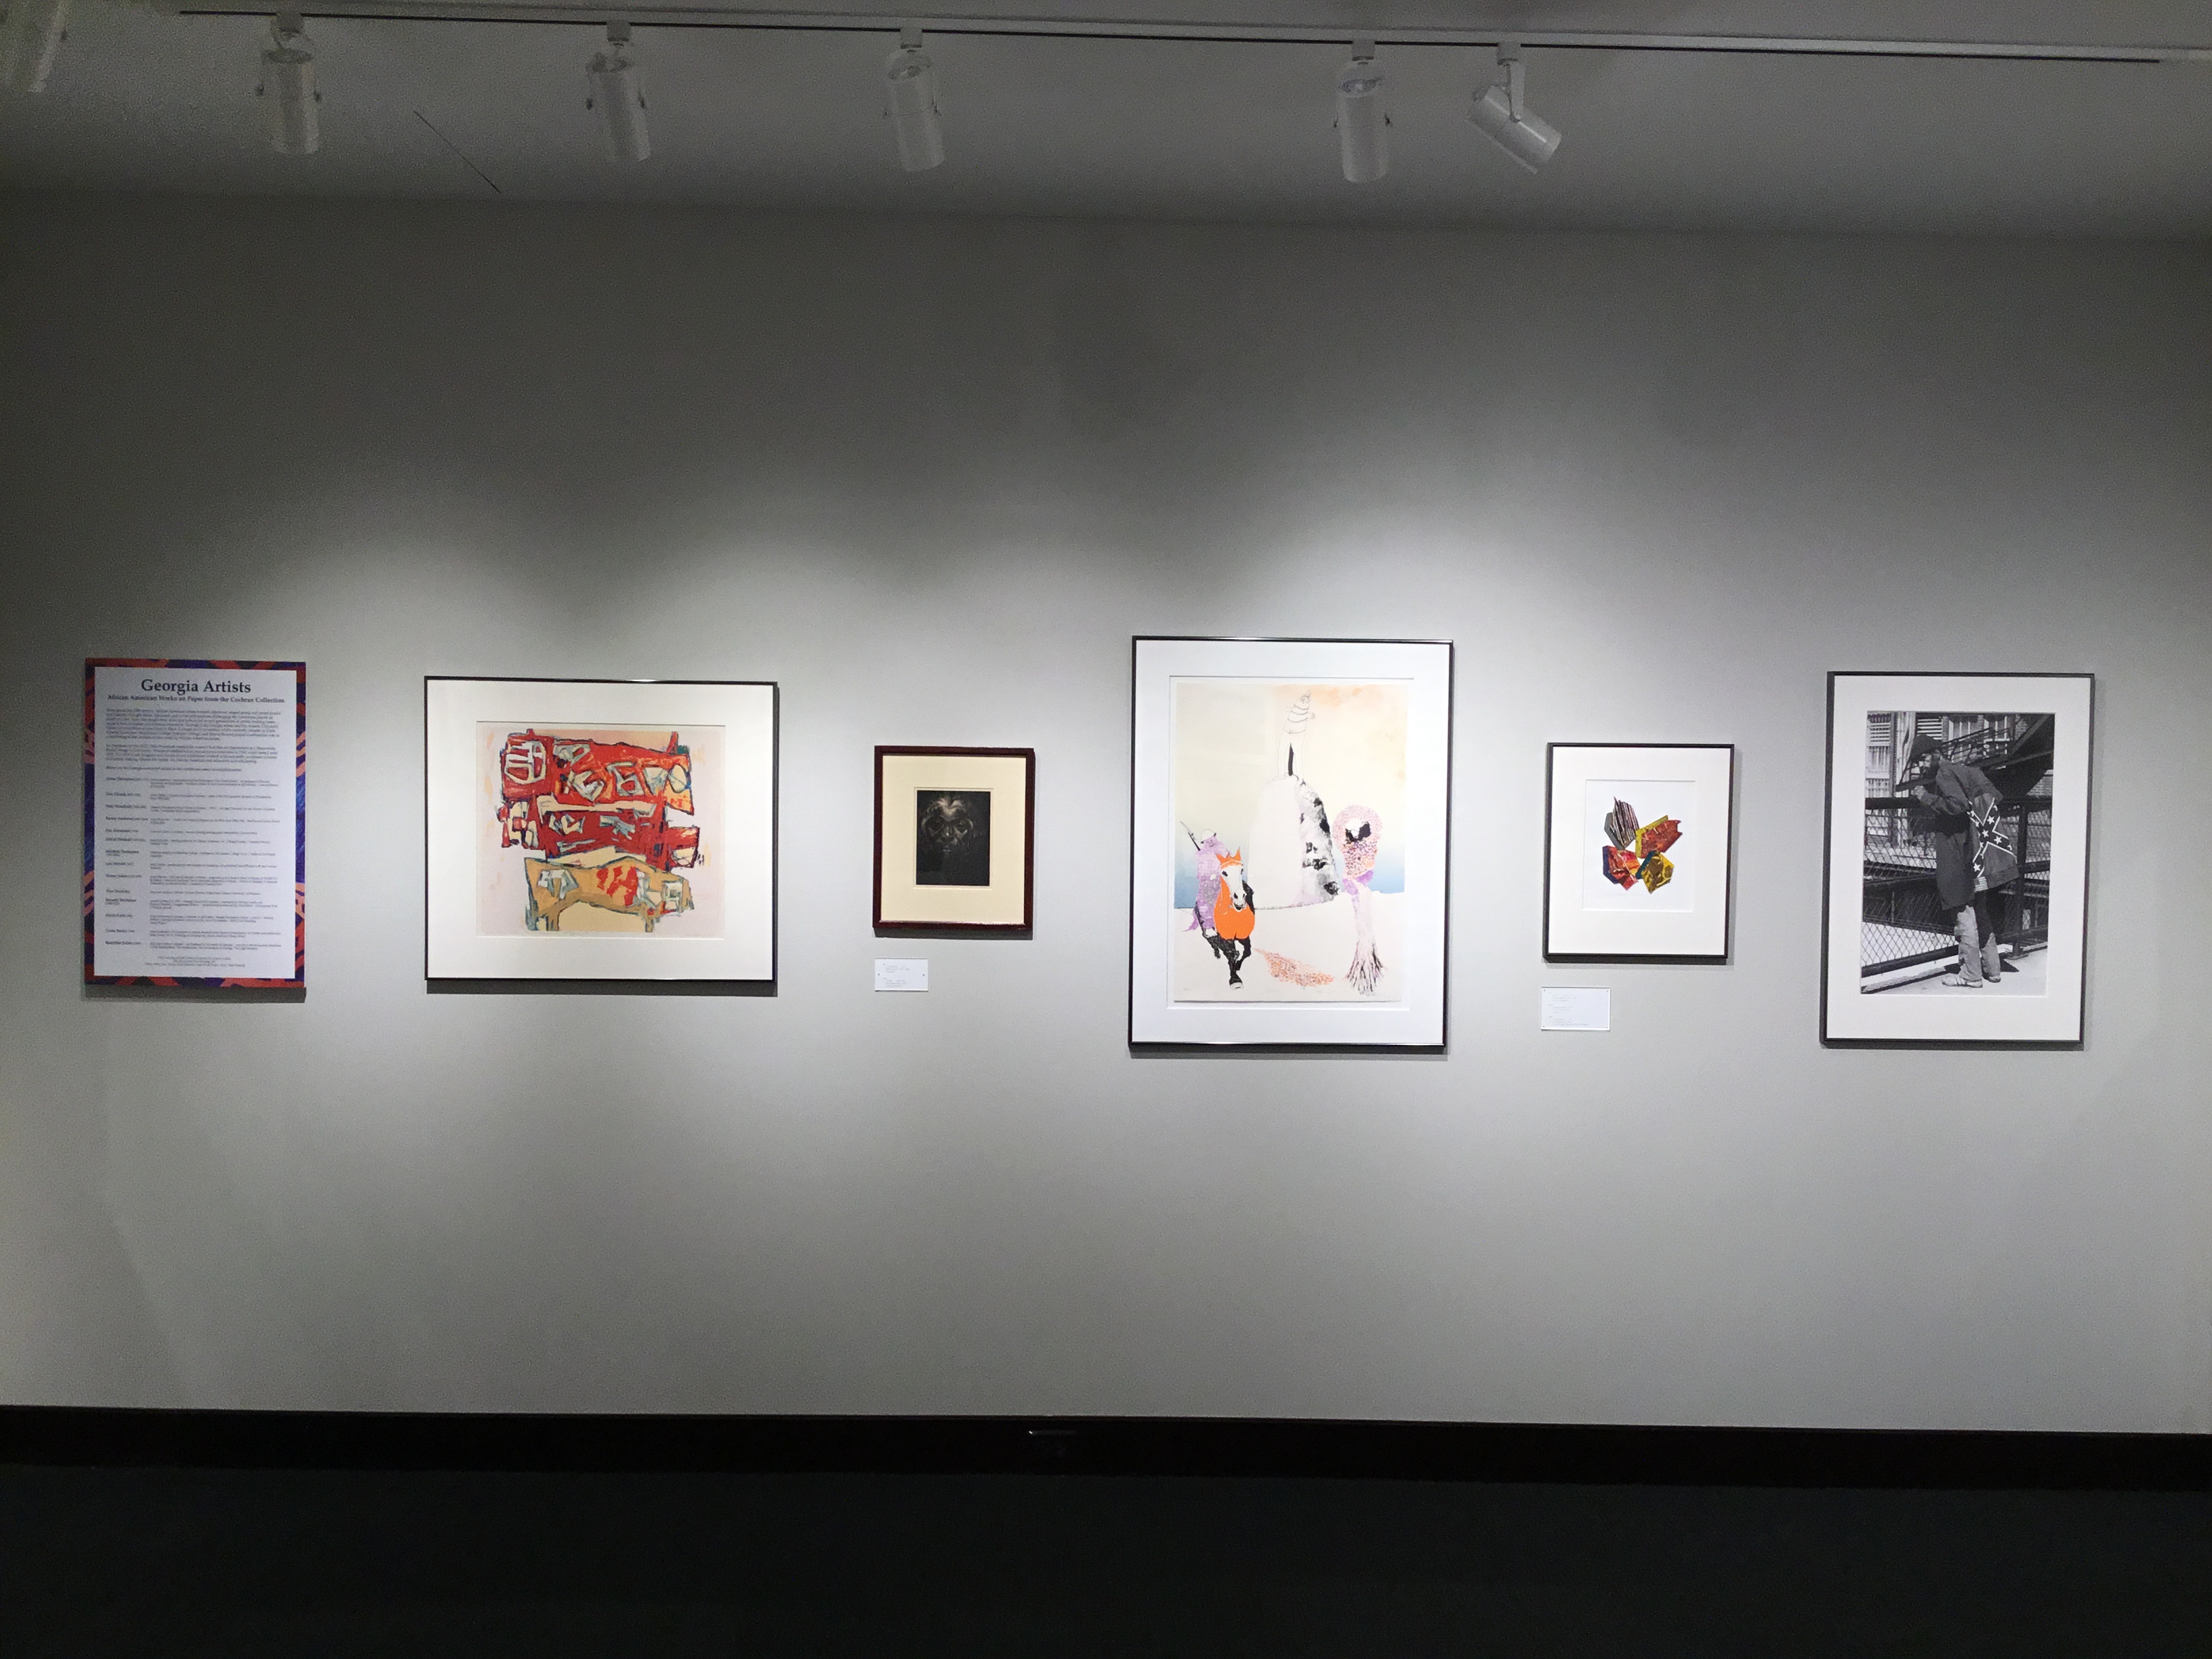 An image of the “Georgia Artists” section of the main gallery, with a placard explaining the lives of the artists on the far left, and five pieces of art from said “Georgia Artists” on the right.